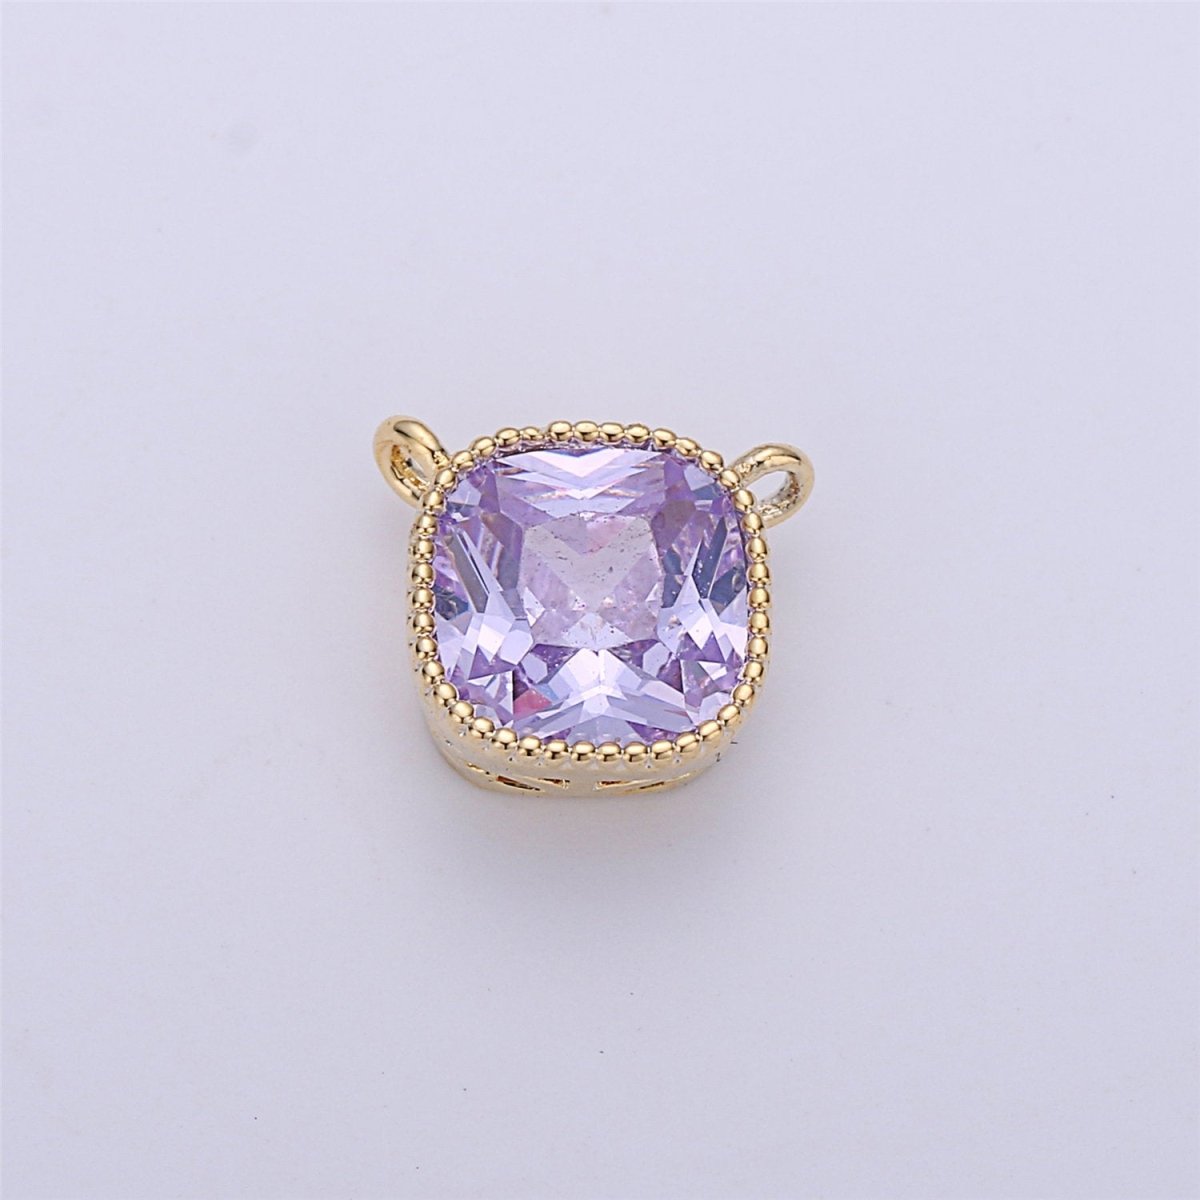 Glass faceted flat Square pendant charm with gold Filled frame, Clear Purple glass charm 8x7 mm, framed glass with Gold Edge Double Bail F-297 - DLUXCA